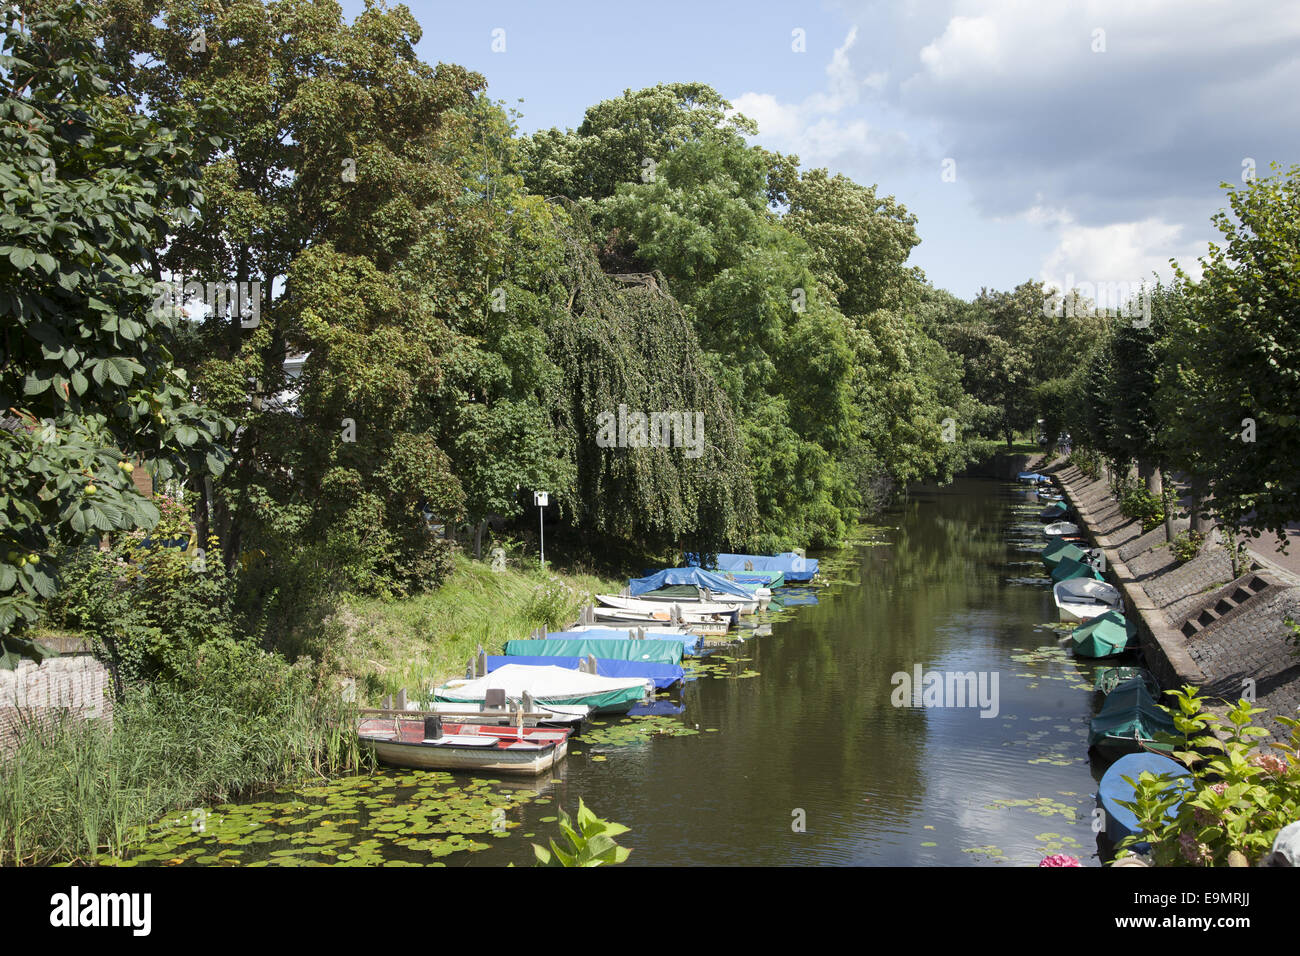 Small private boats parked along a canal in the old walled & fortified city of Naarden, Netherlands. Stock Photo